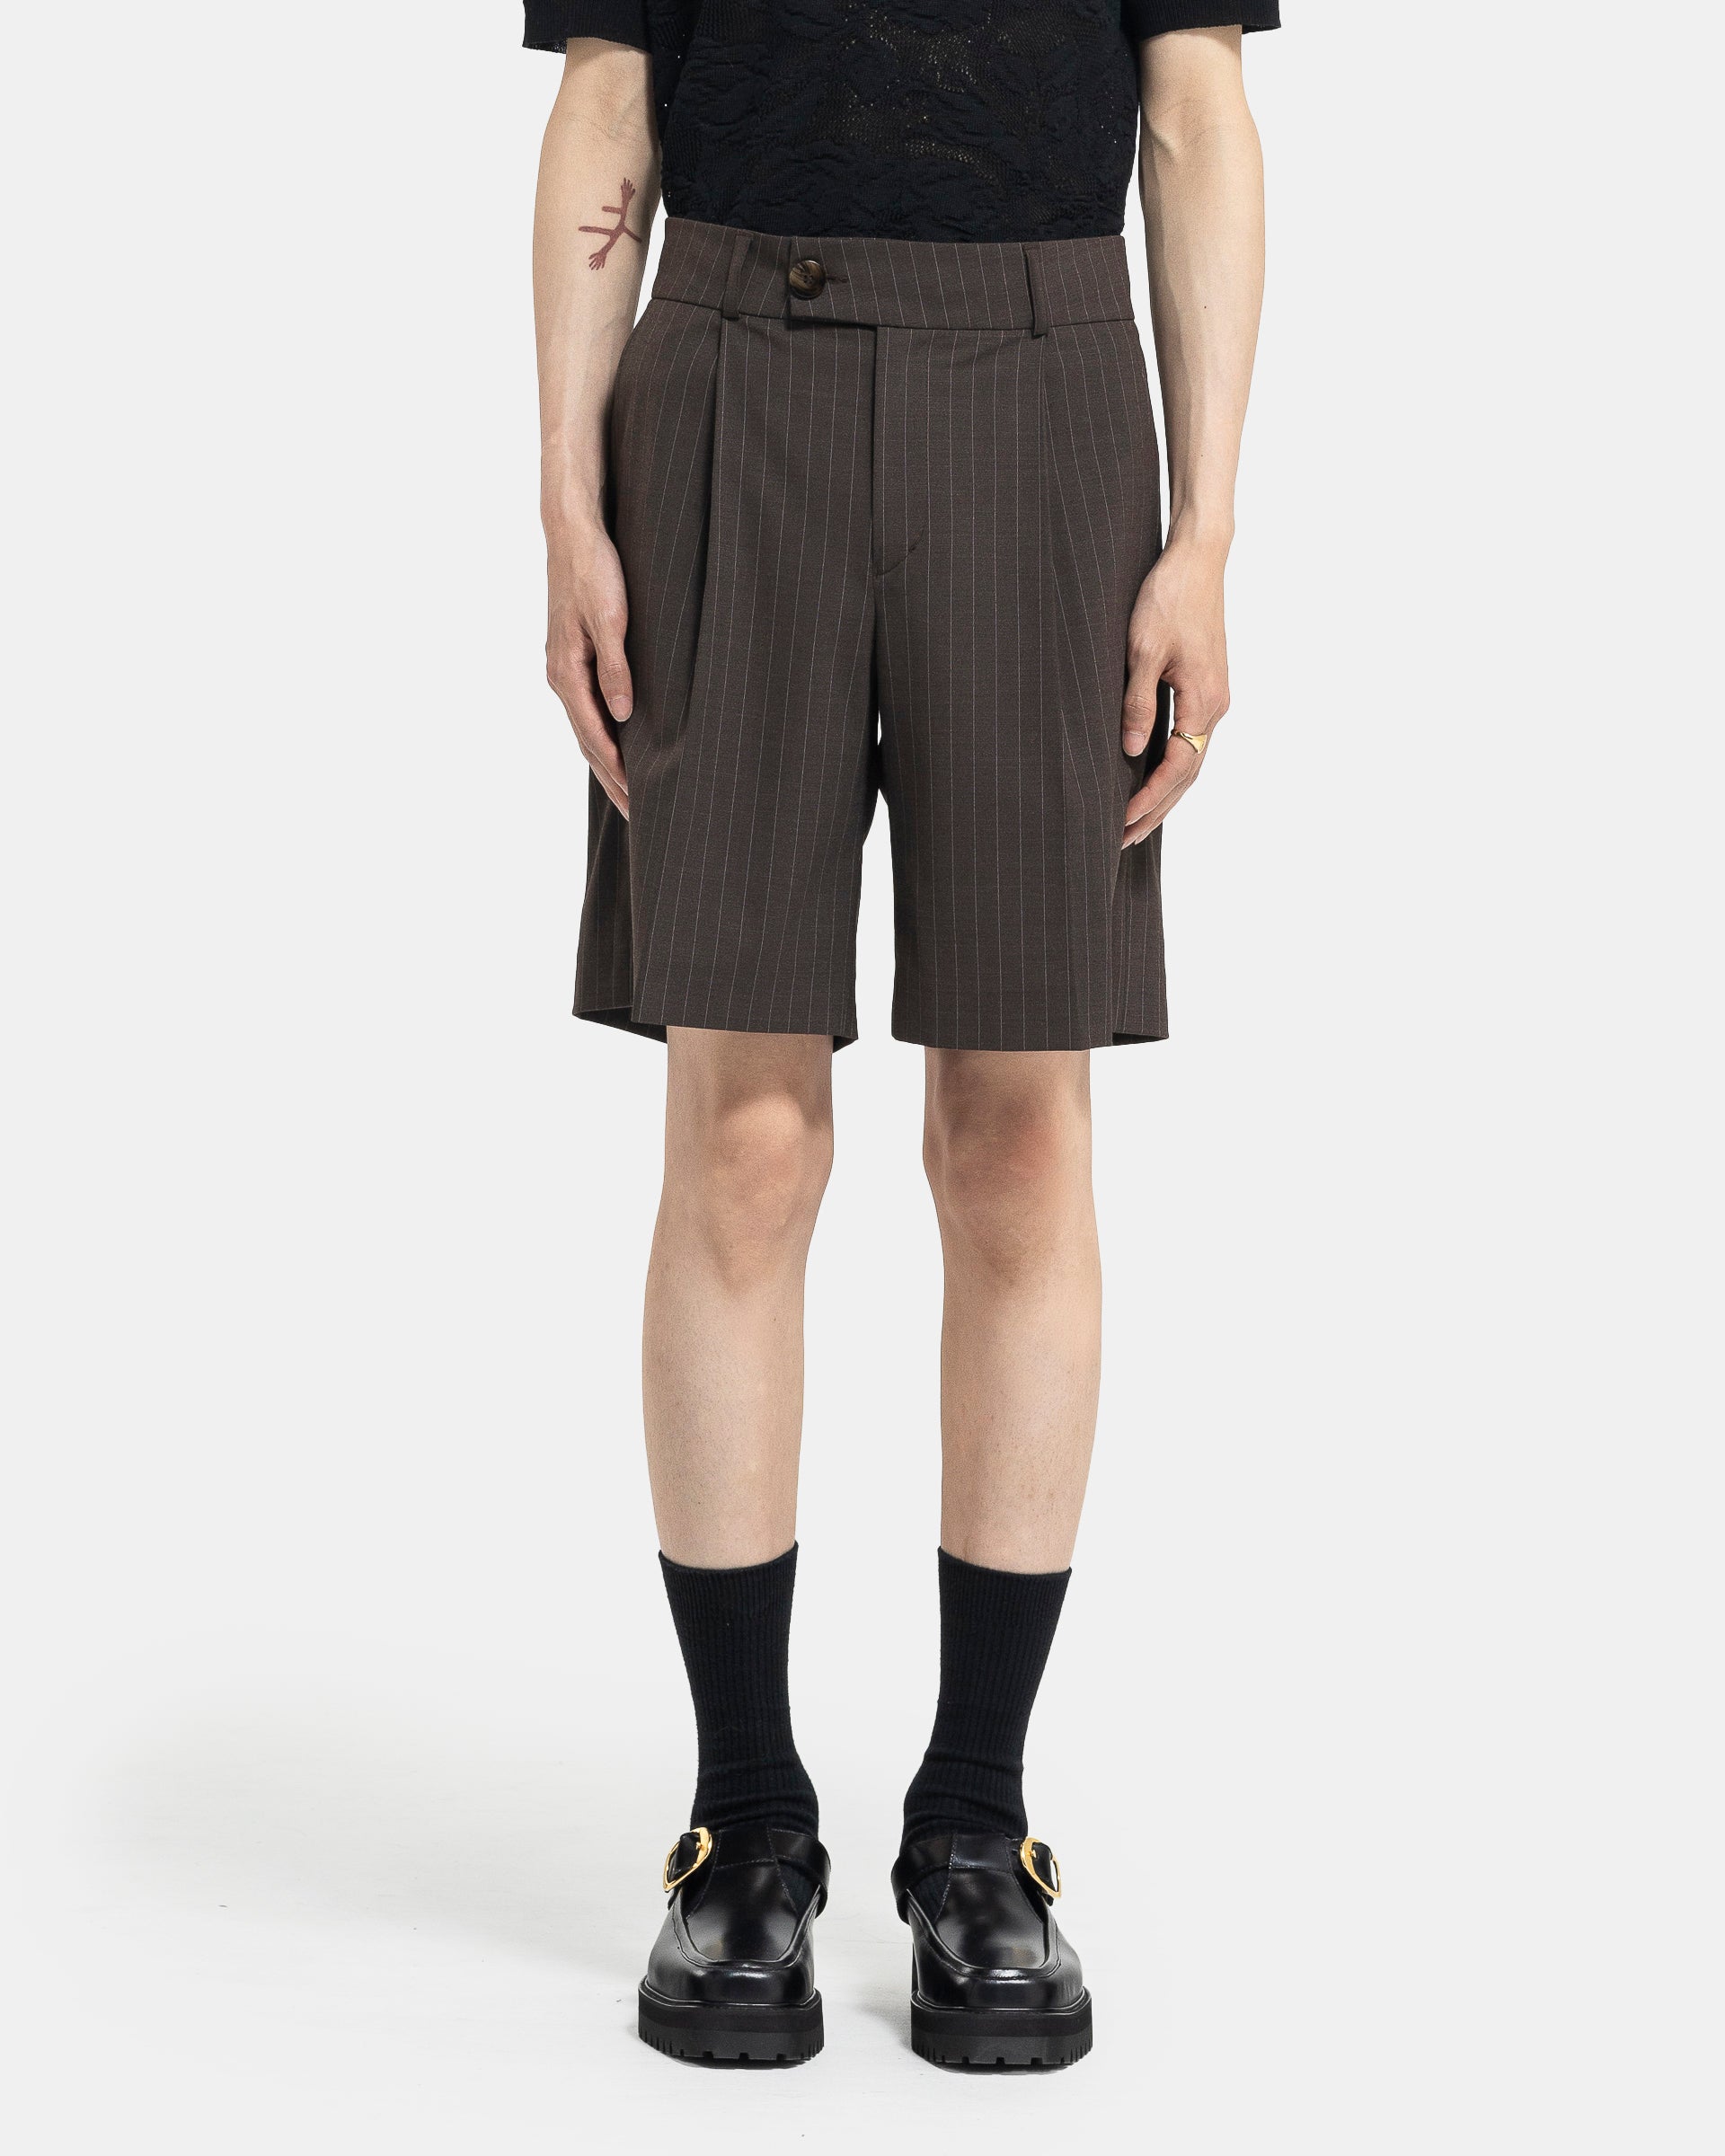 Tailored Shorts in Brown Pin Stripe